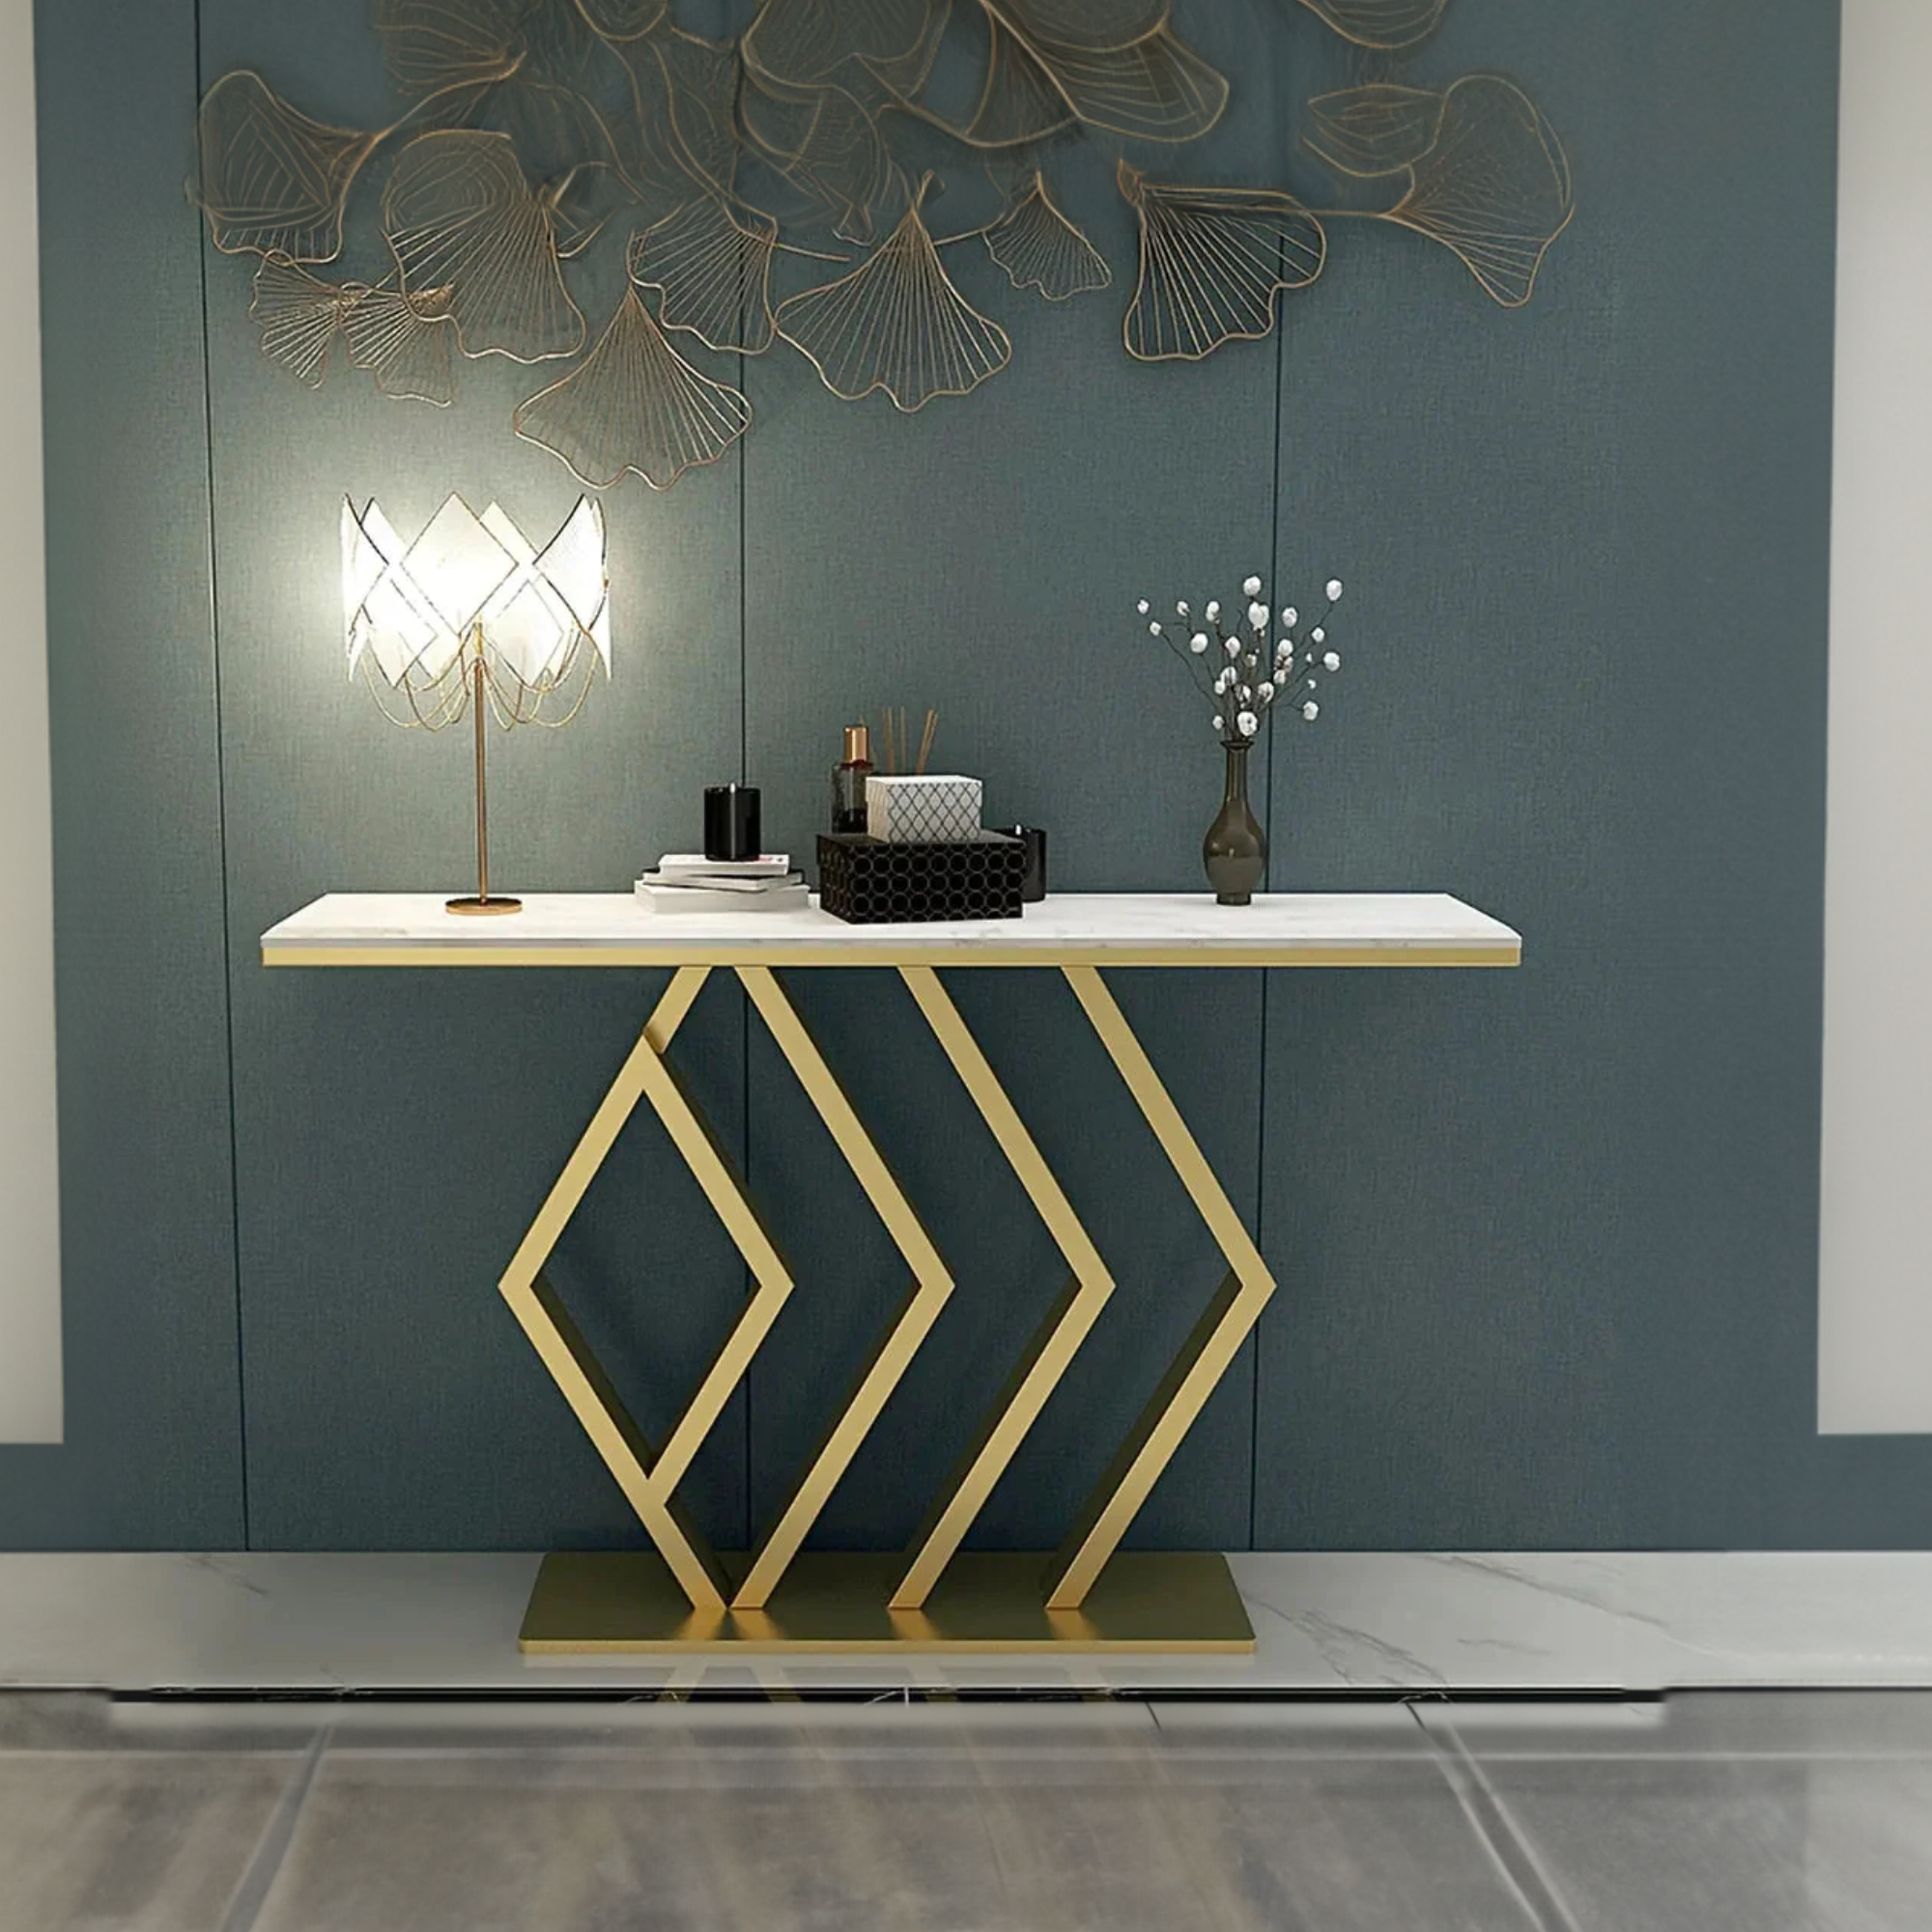 Console Table in Geometric Pattern Home Decor items		